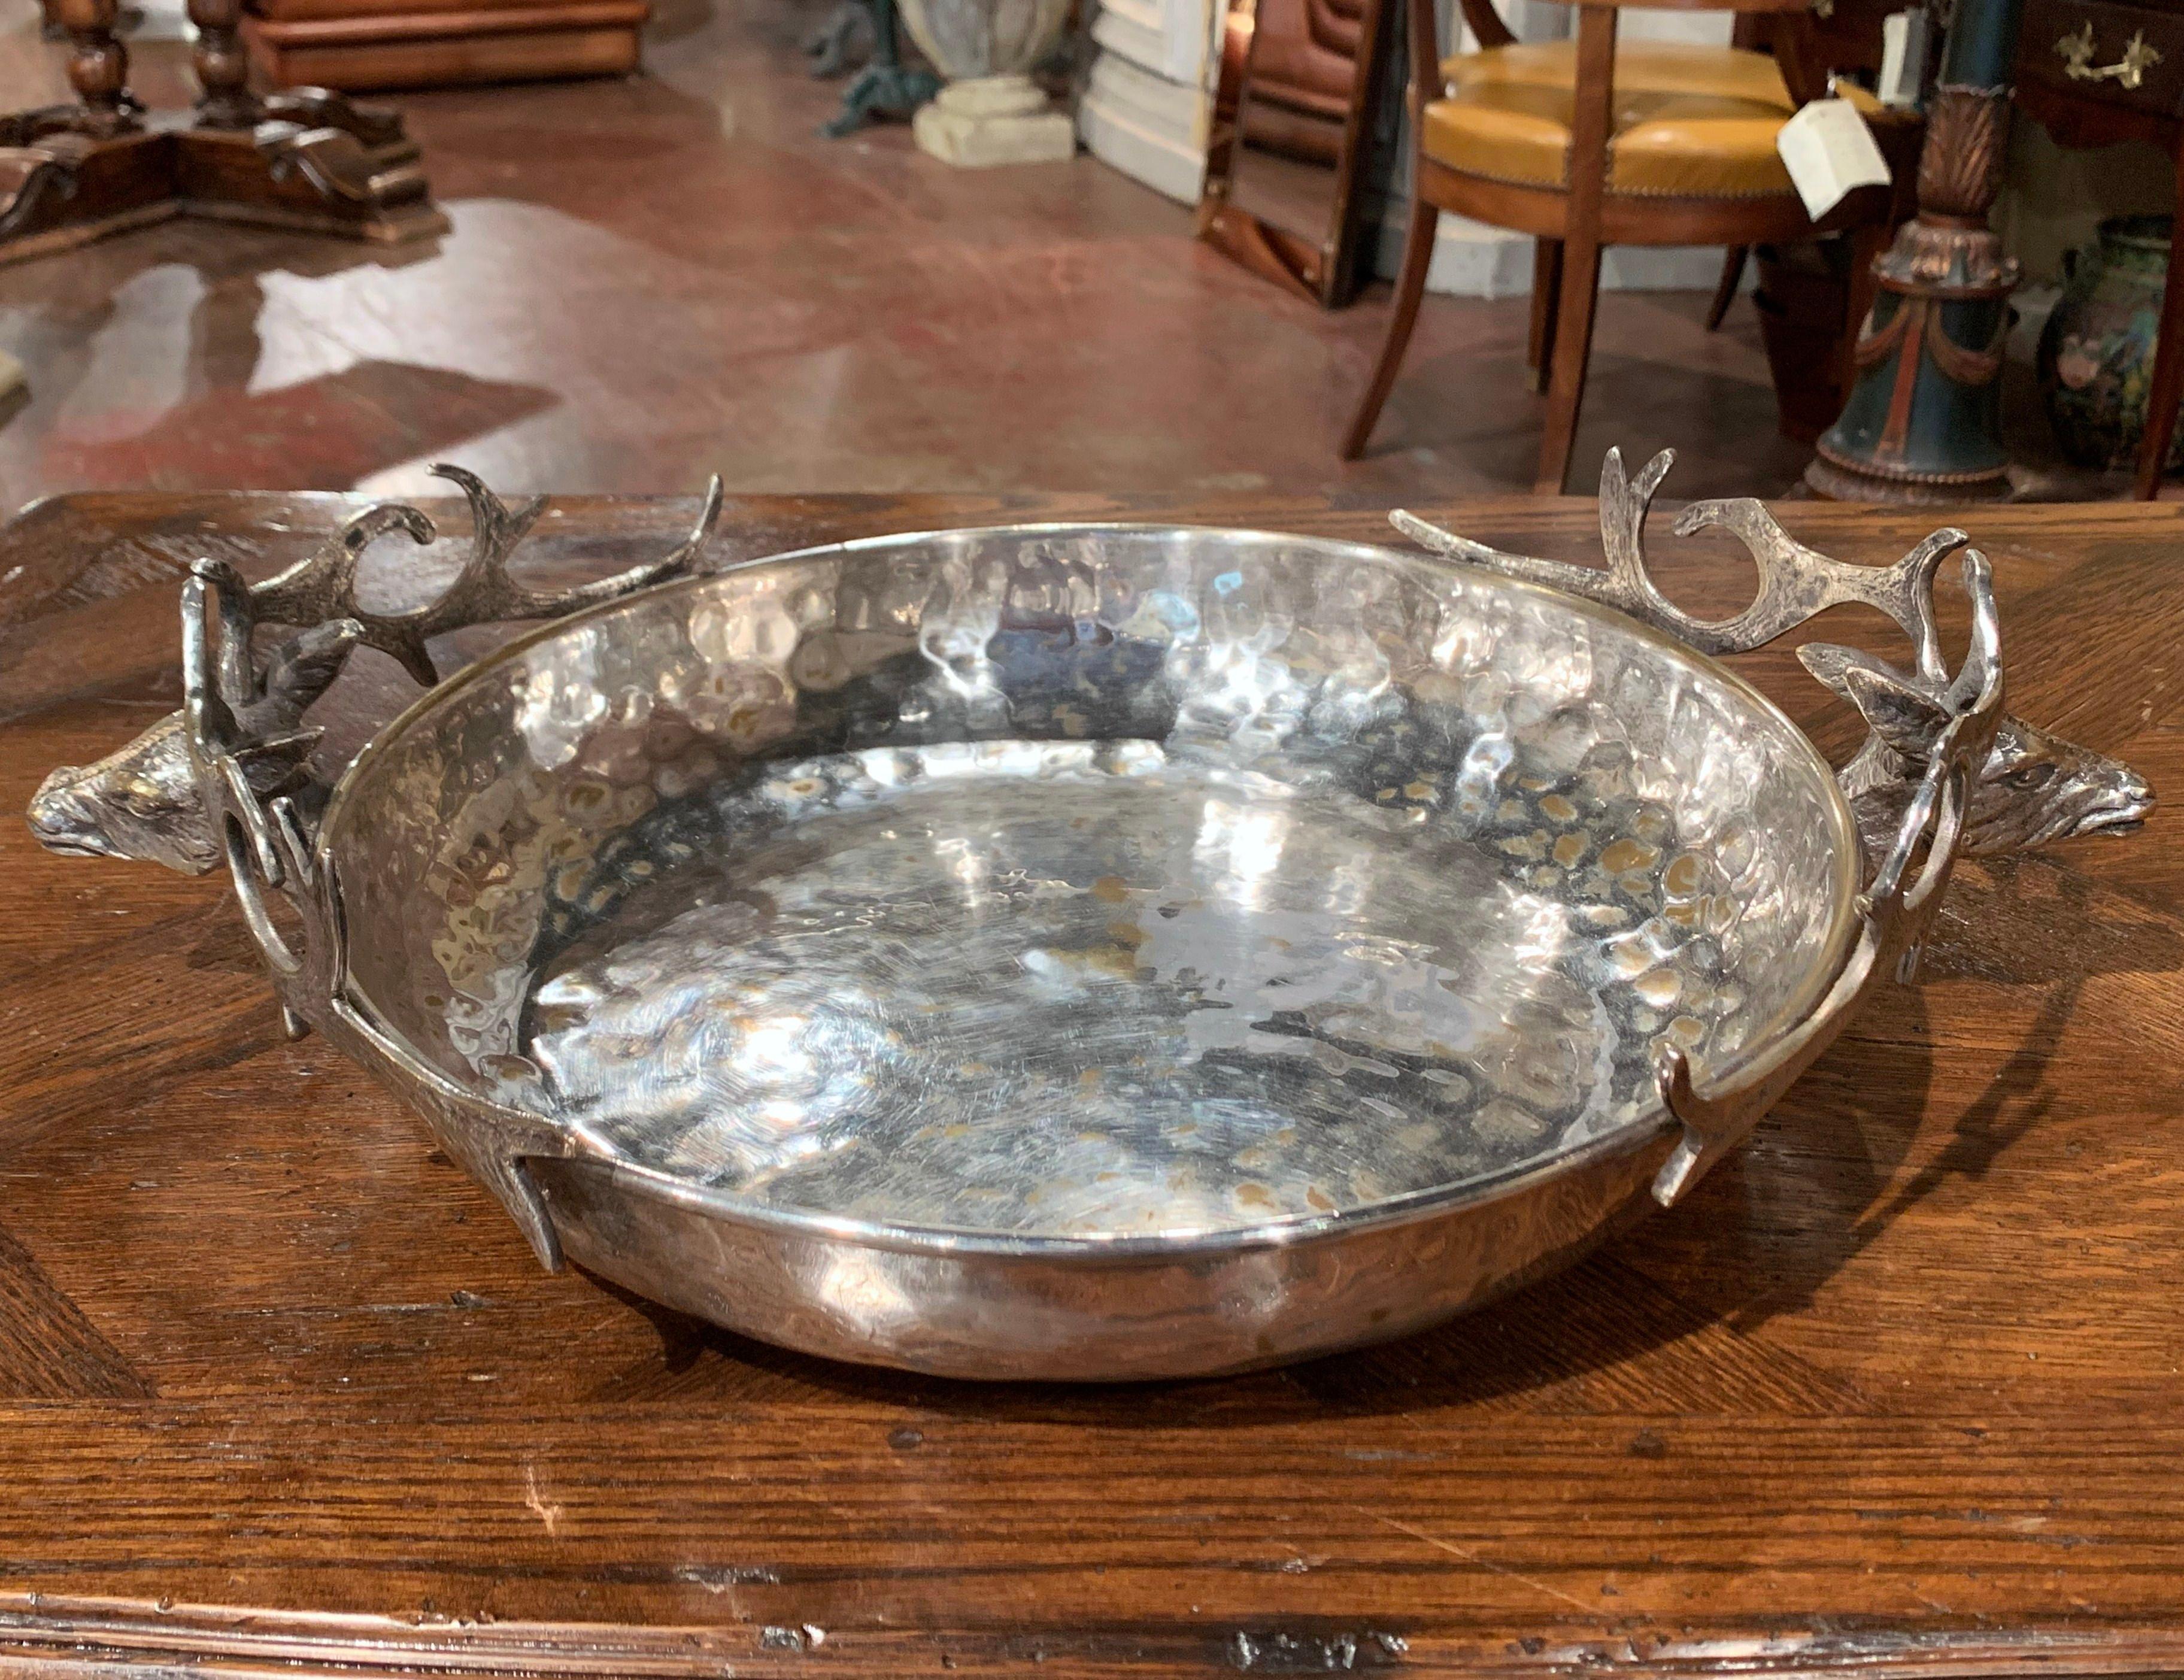 This decorative bowl was created in France, circa 1920. Round in shape and made of brass and sliver plated, the traditional centrepiece features a pair of deer with antlers handles on either side for countryside flair. This unique, rustic dish is in